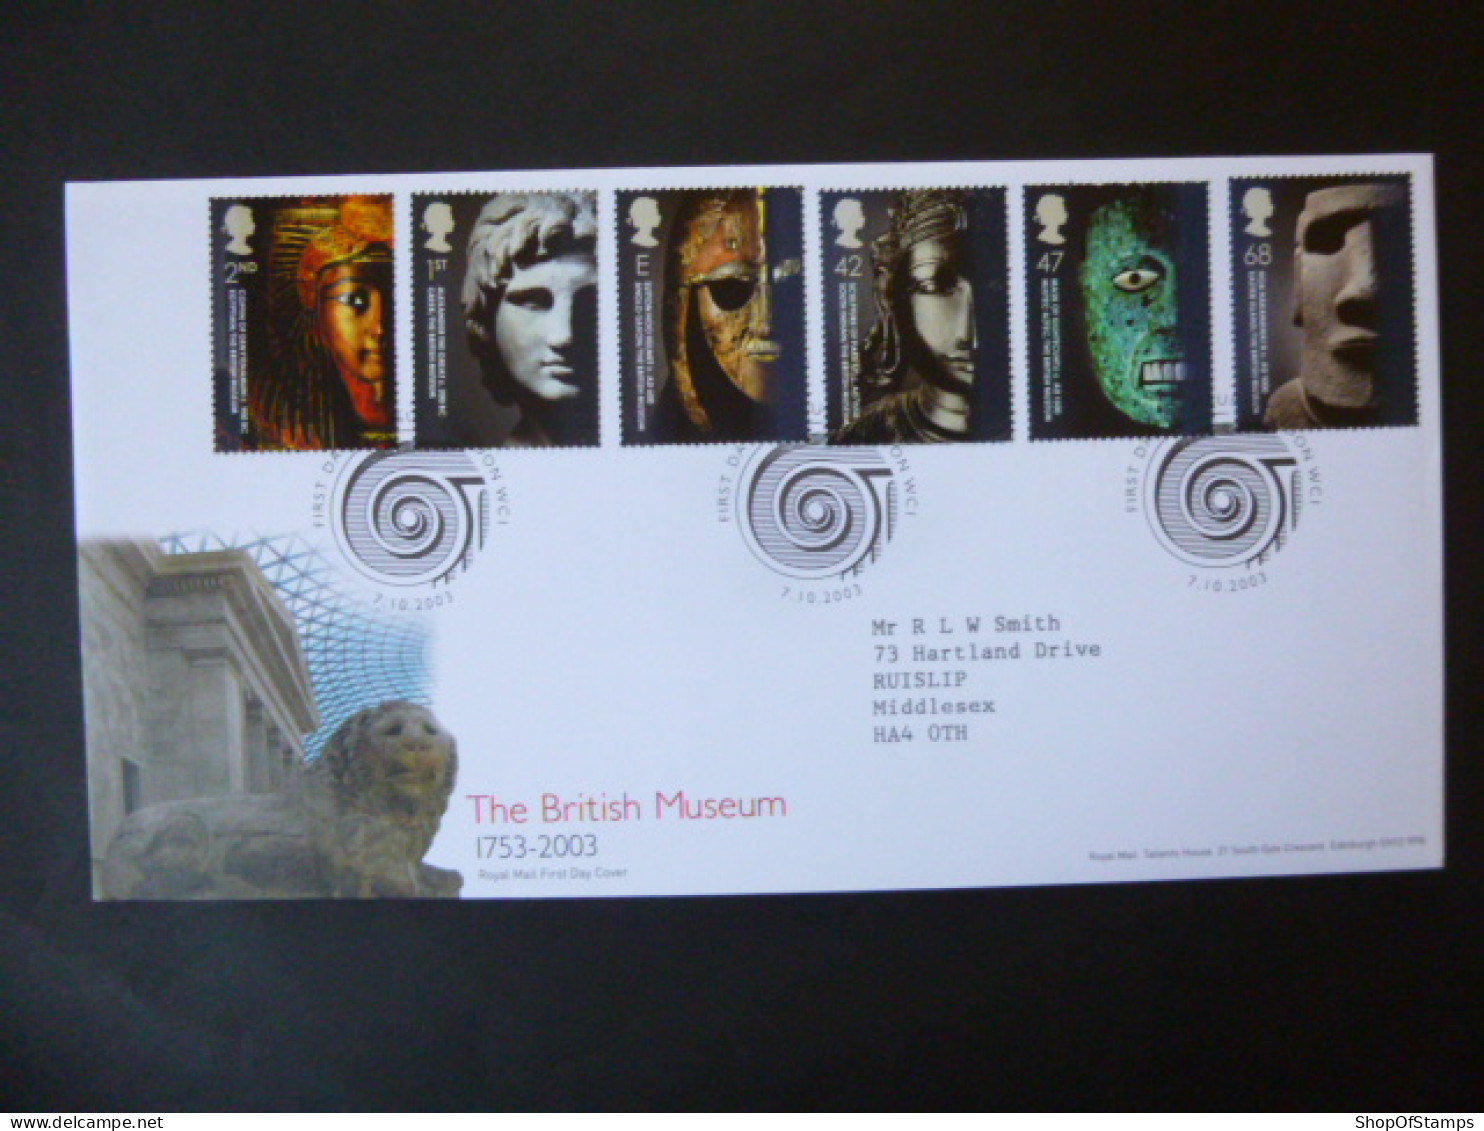 GREAT BRITAIN SG 2404-09 BRITISH MUSEUM 250TH ANNIVERSARY FDC LONDON - Unclassified